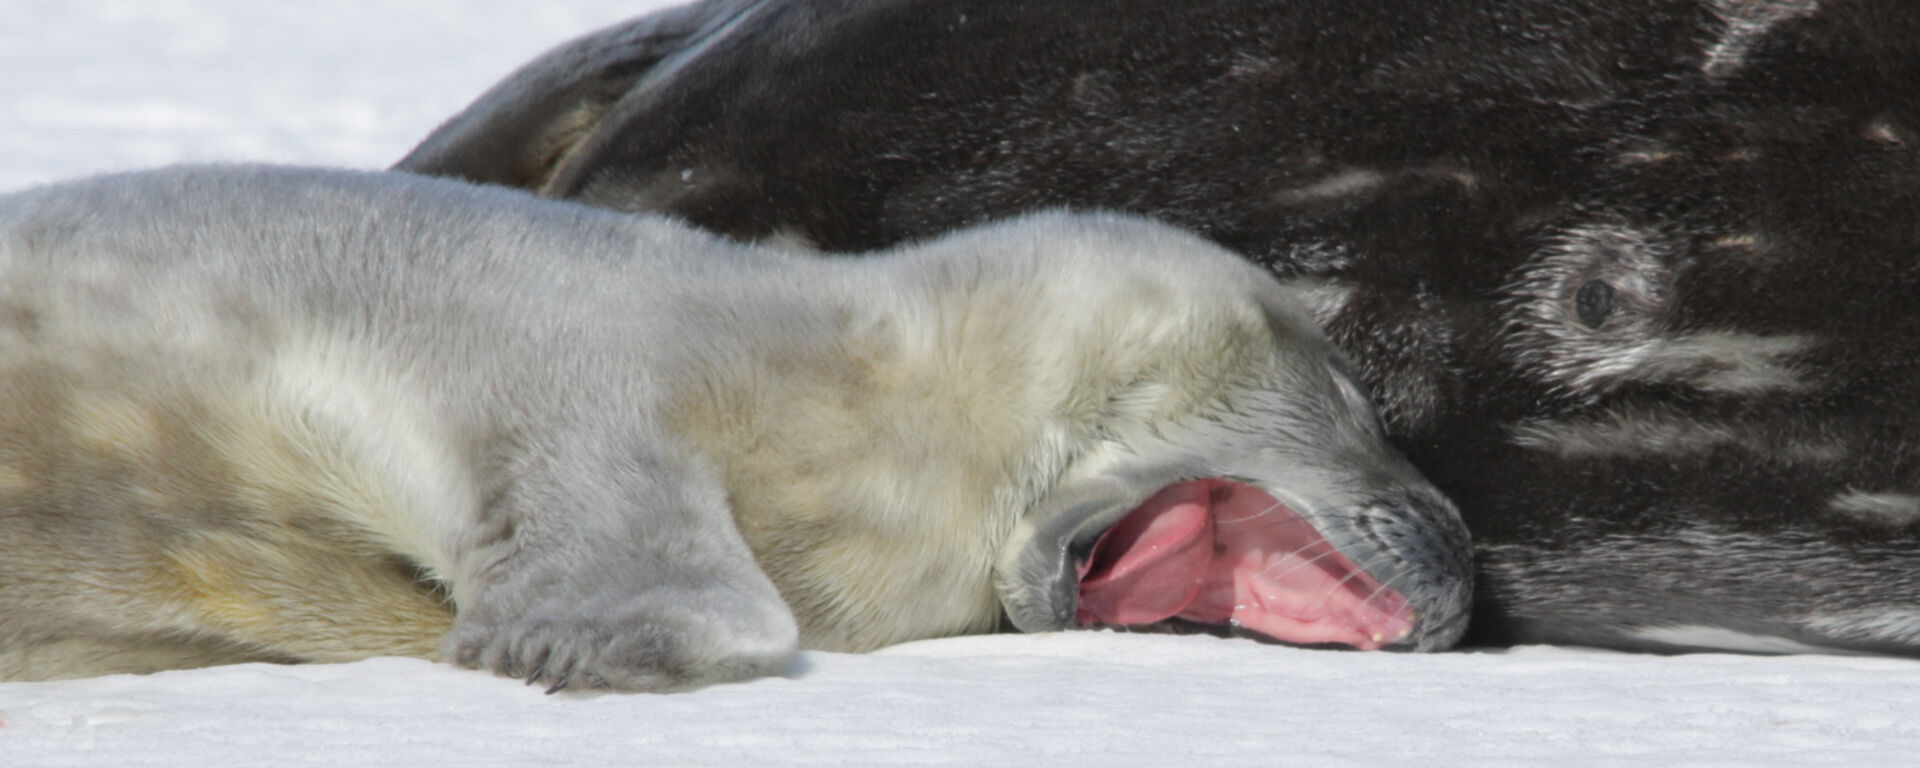 A young weddell seal pup yawning